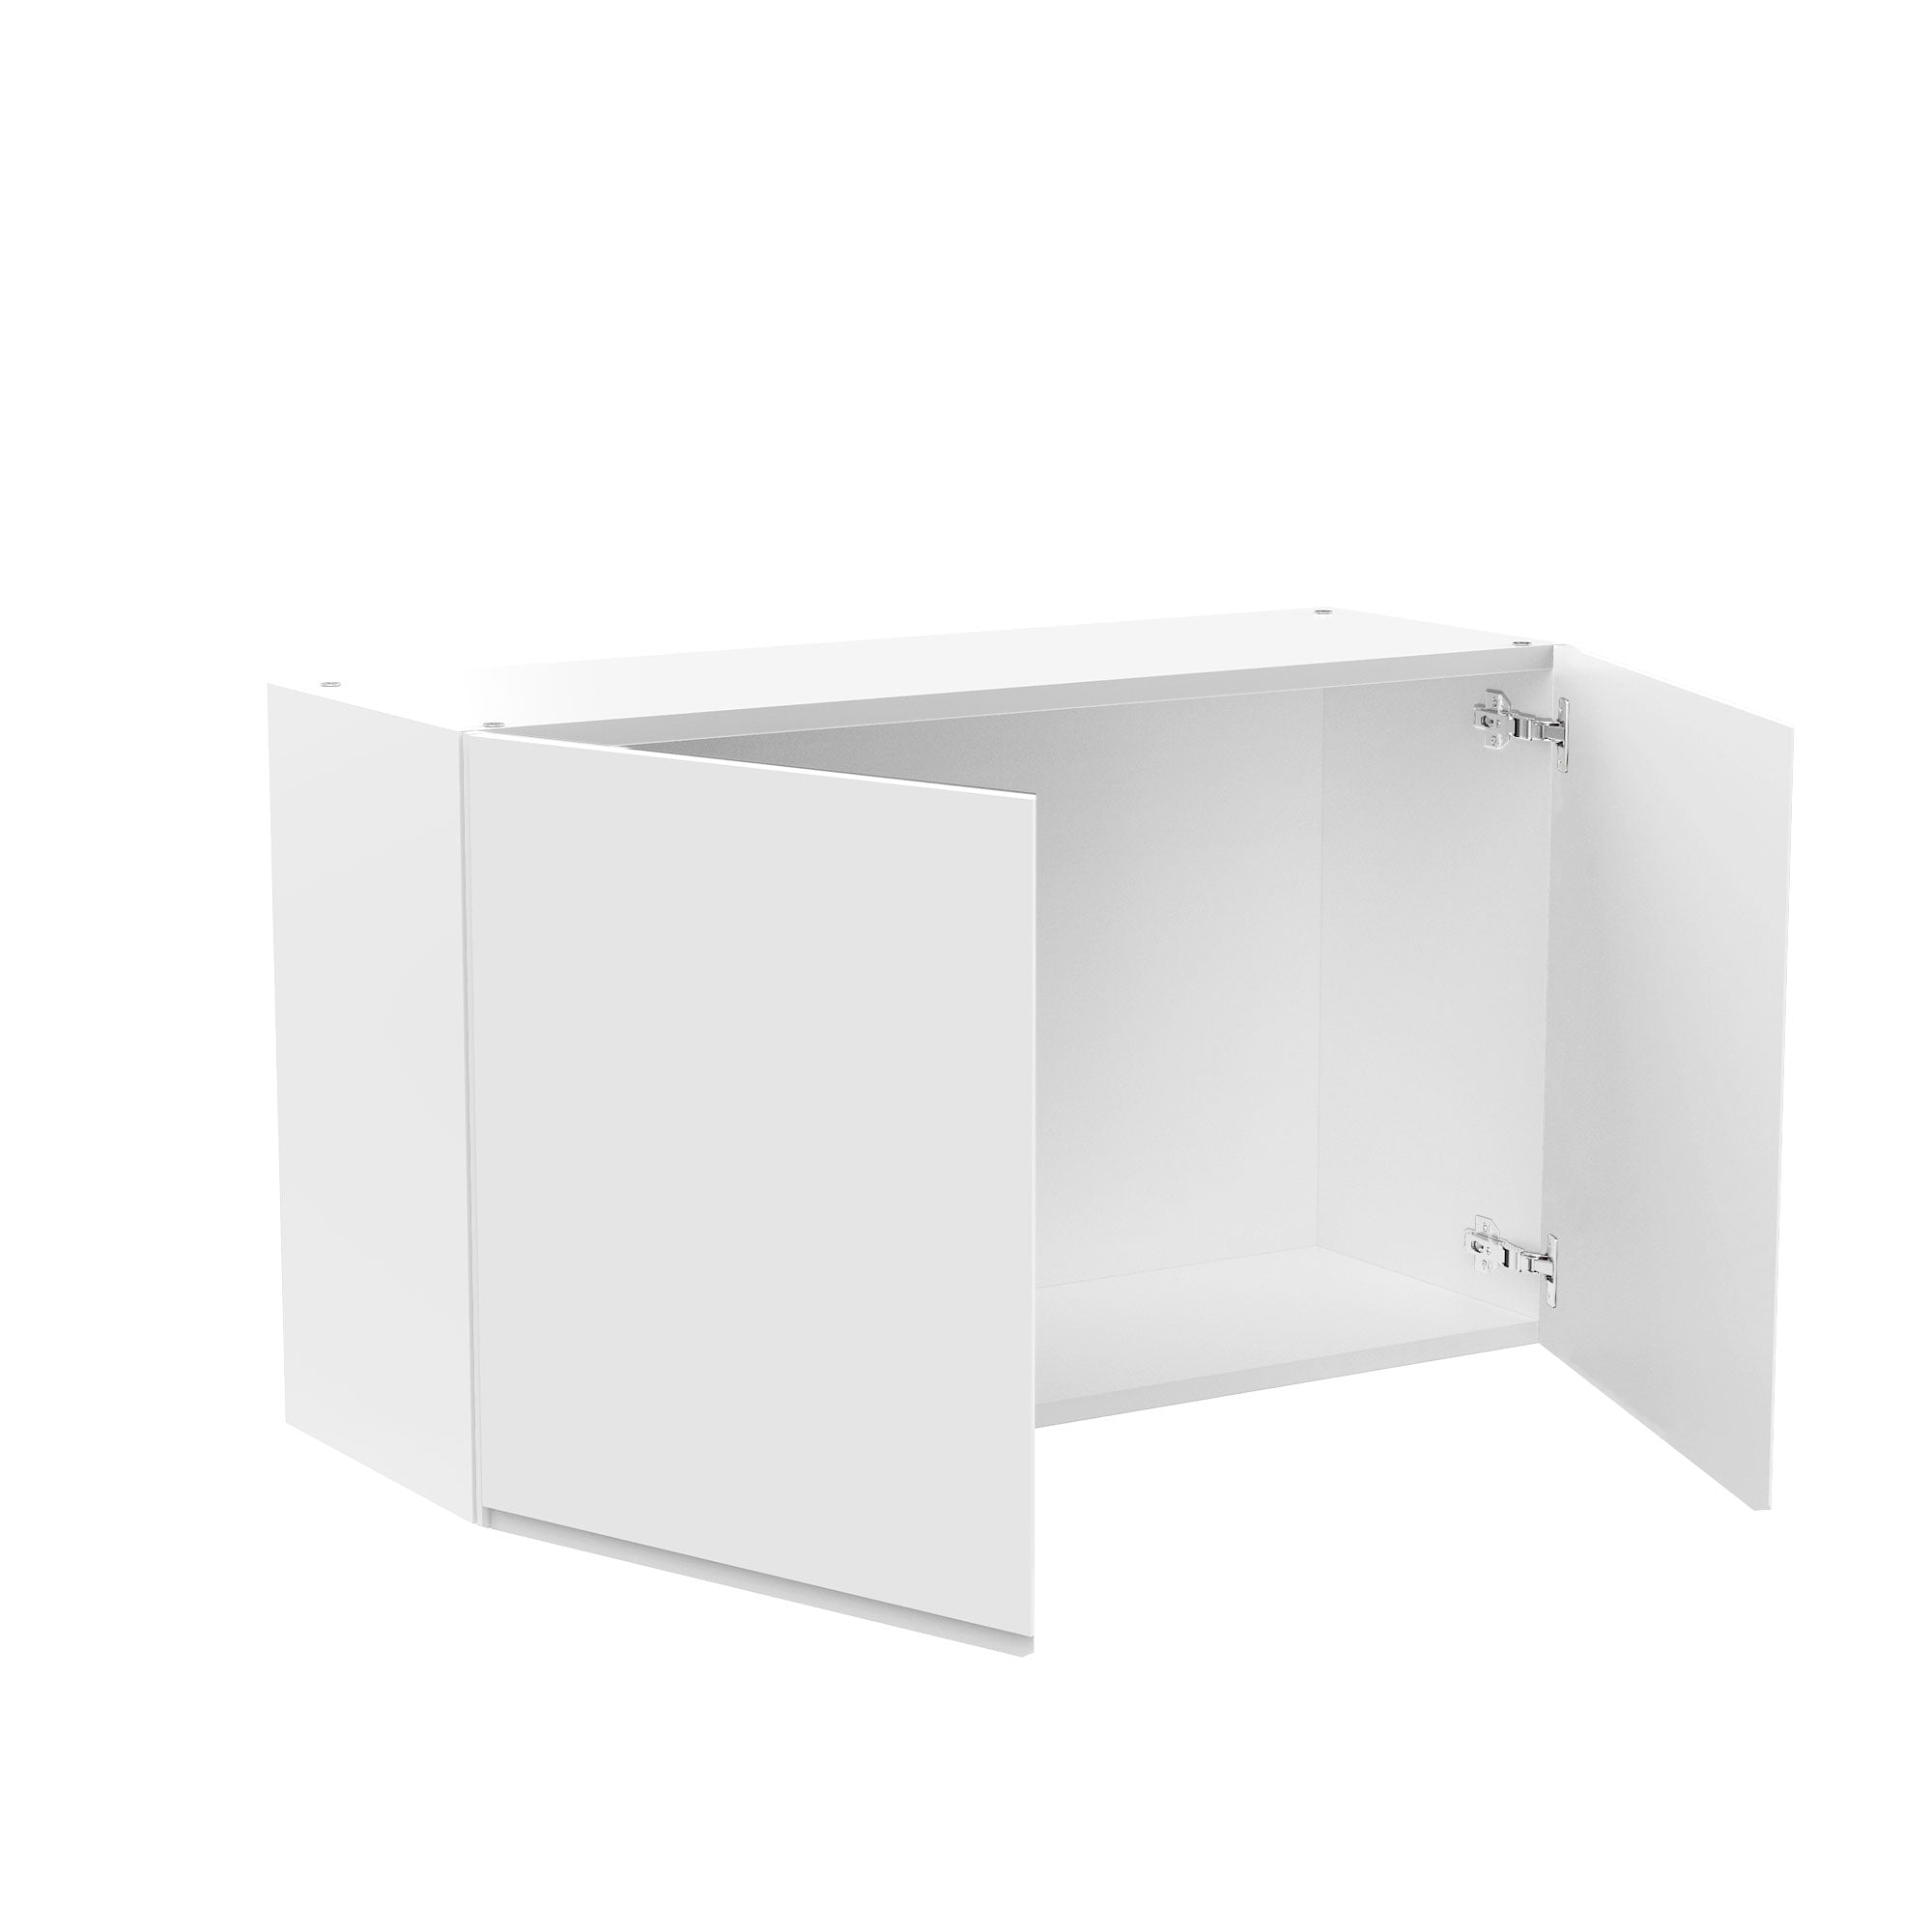 Kitchen Wall Cabinet - RTA - Lacquer white - 2 Door Wall Cabinet | 36"W x 21"H x 12"D